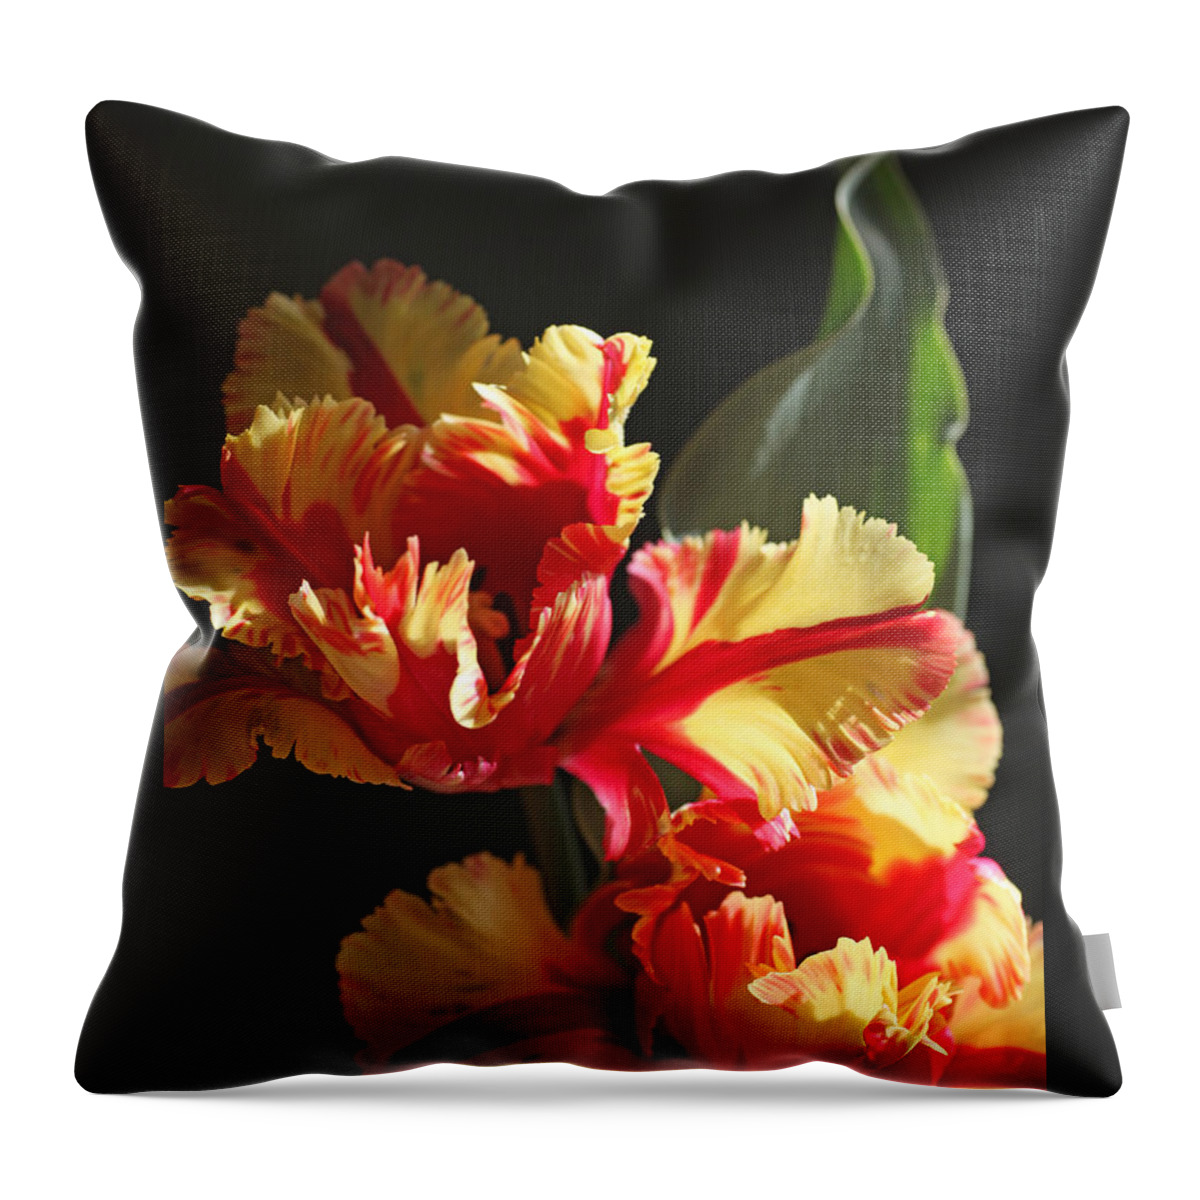 Tulip Throw Pillow featuring the photograph Parrot Tulip by Tammy Pool